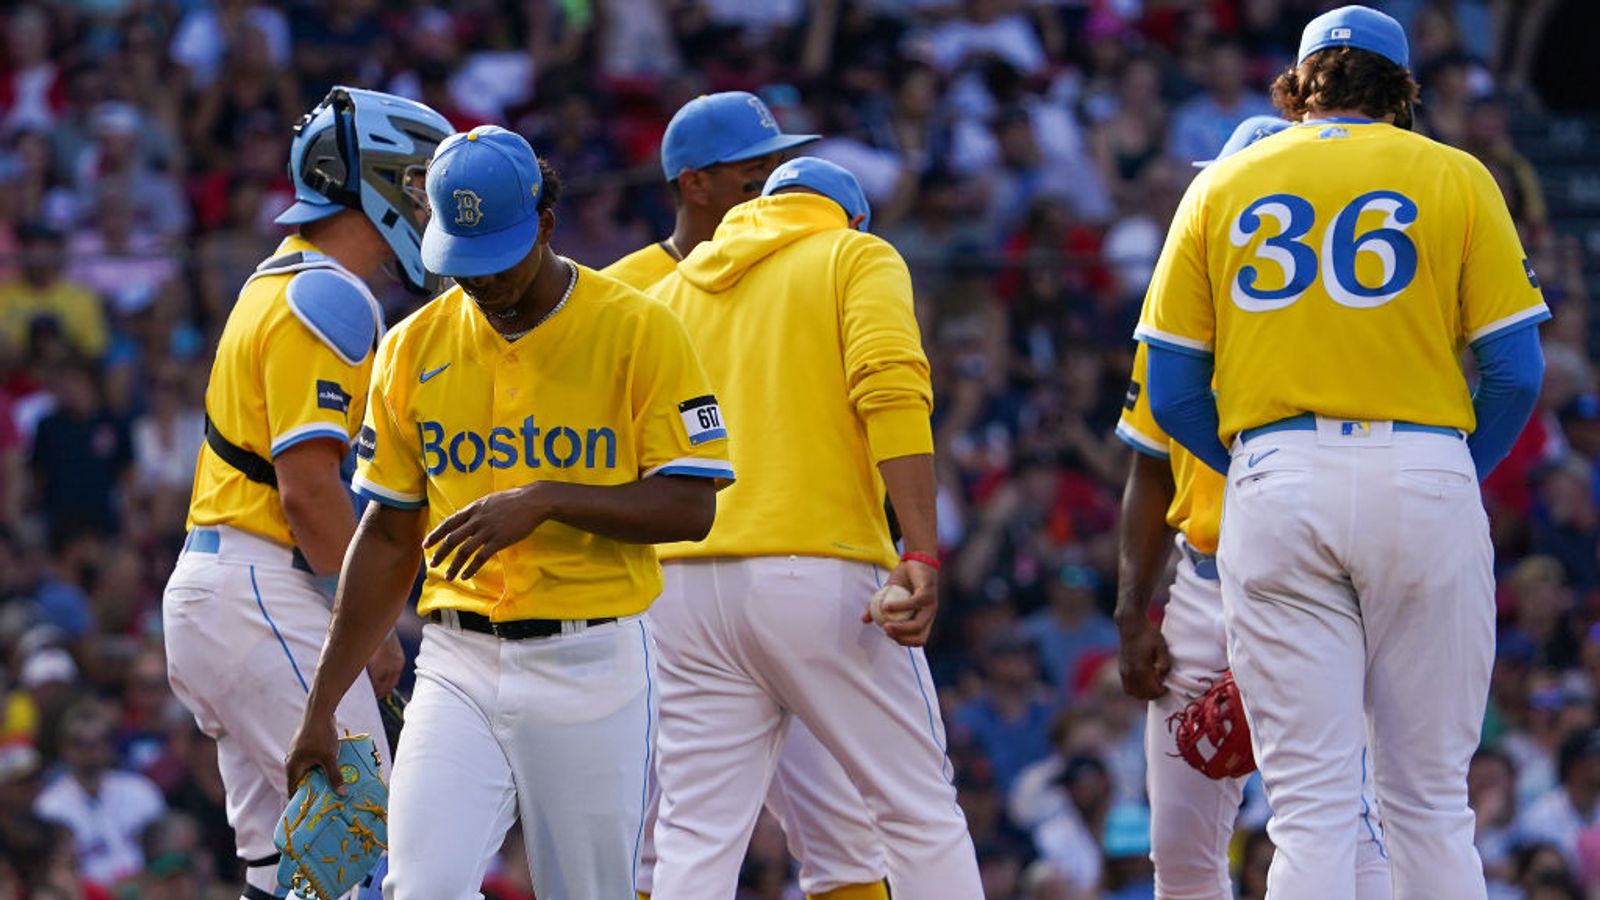 boston red sox blue and yellow uniforms